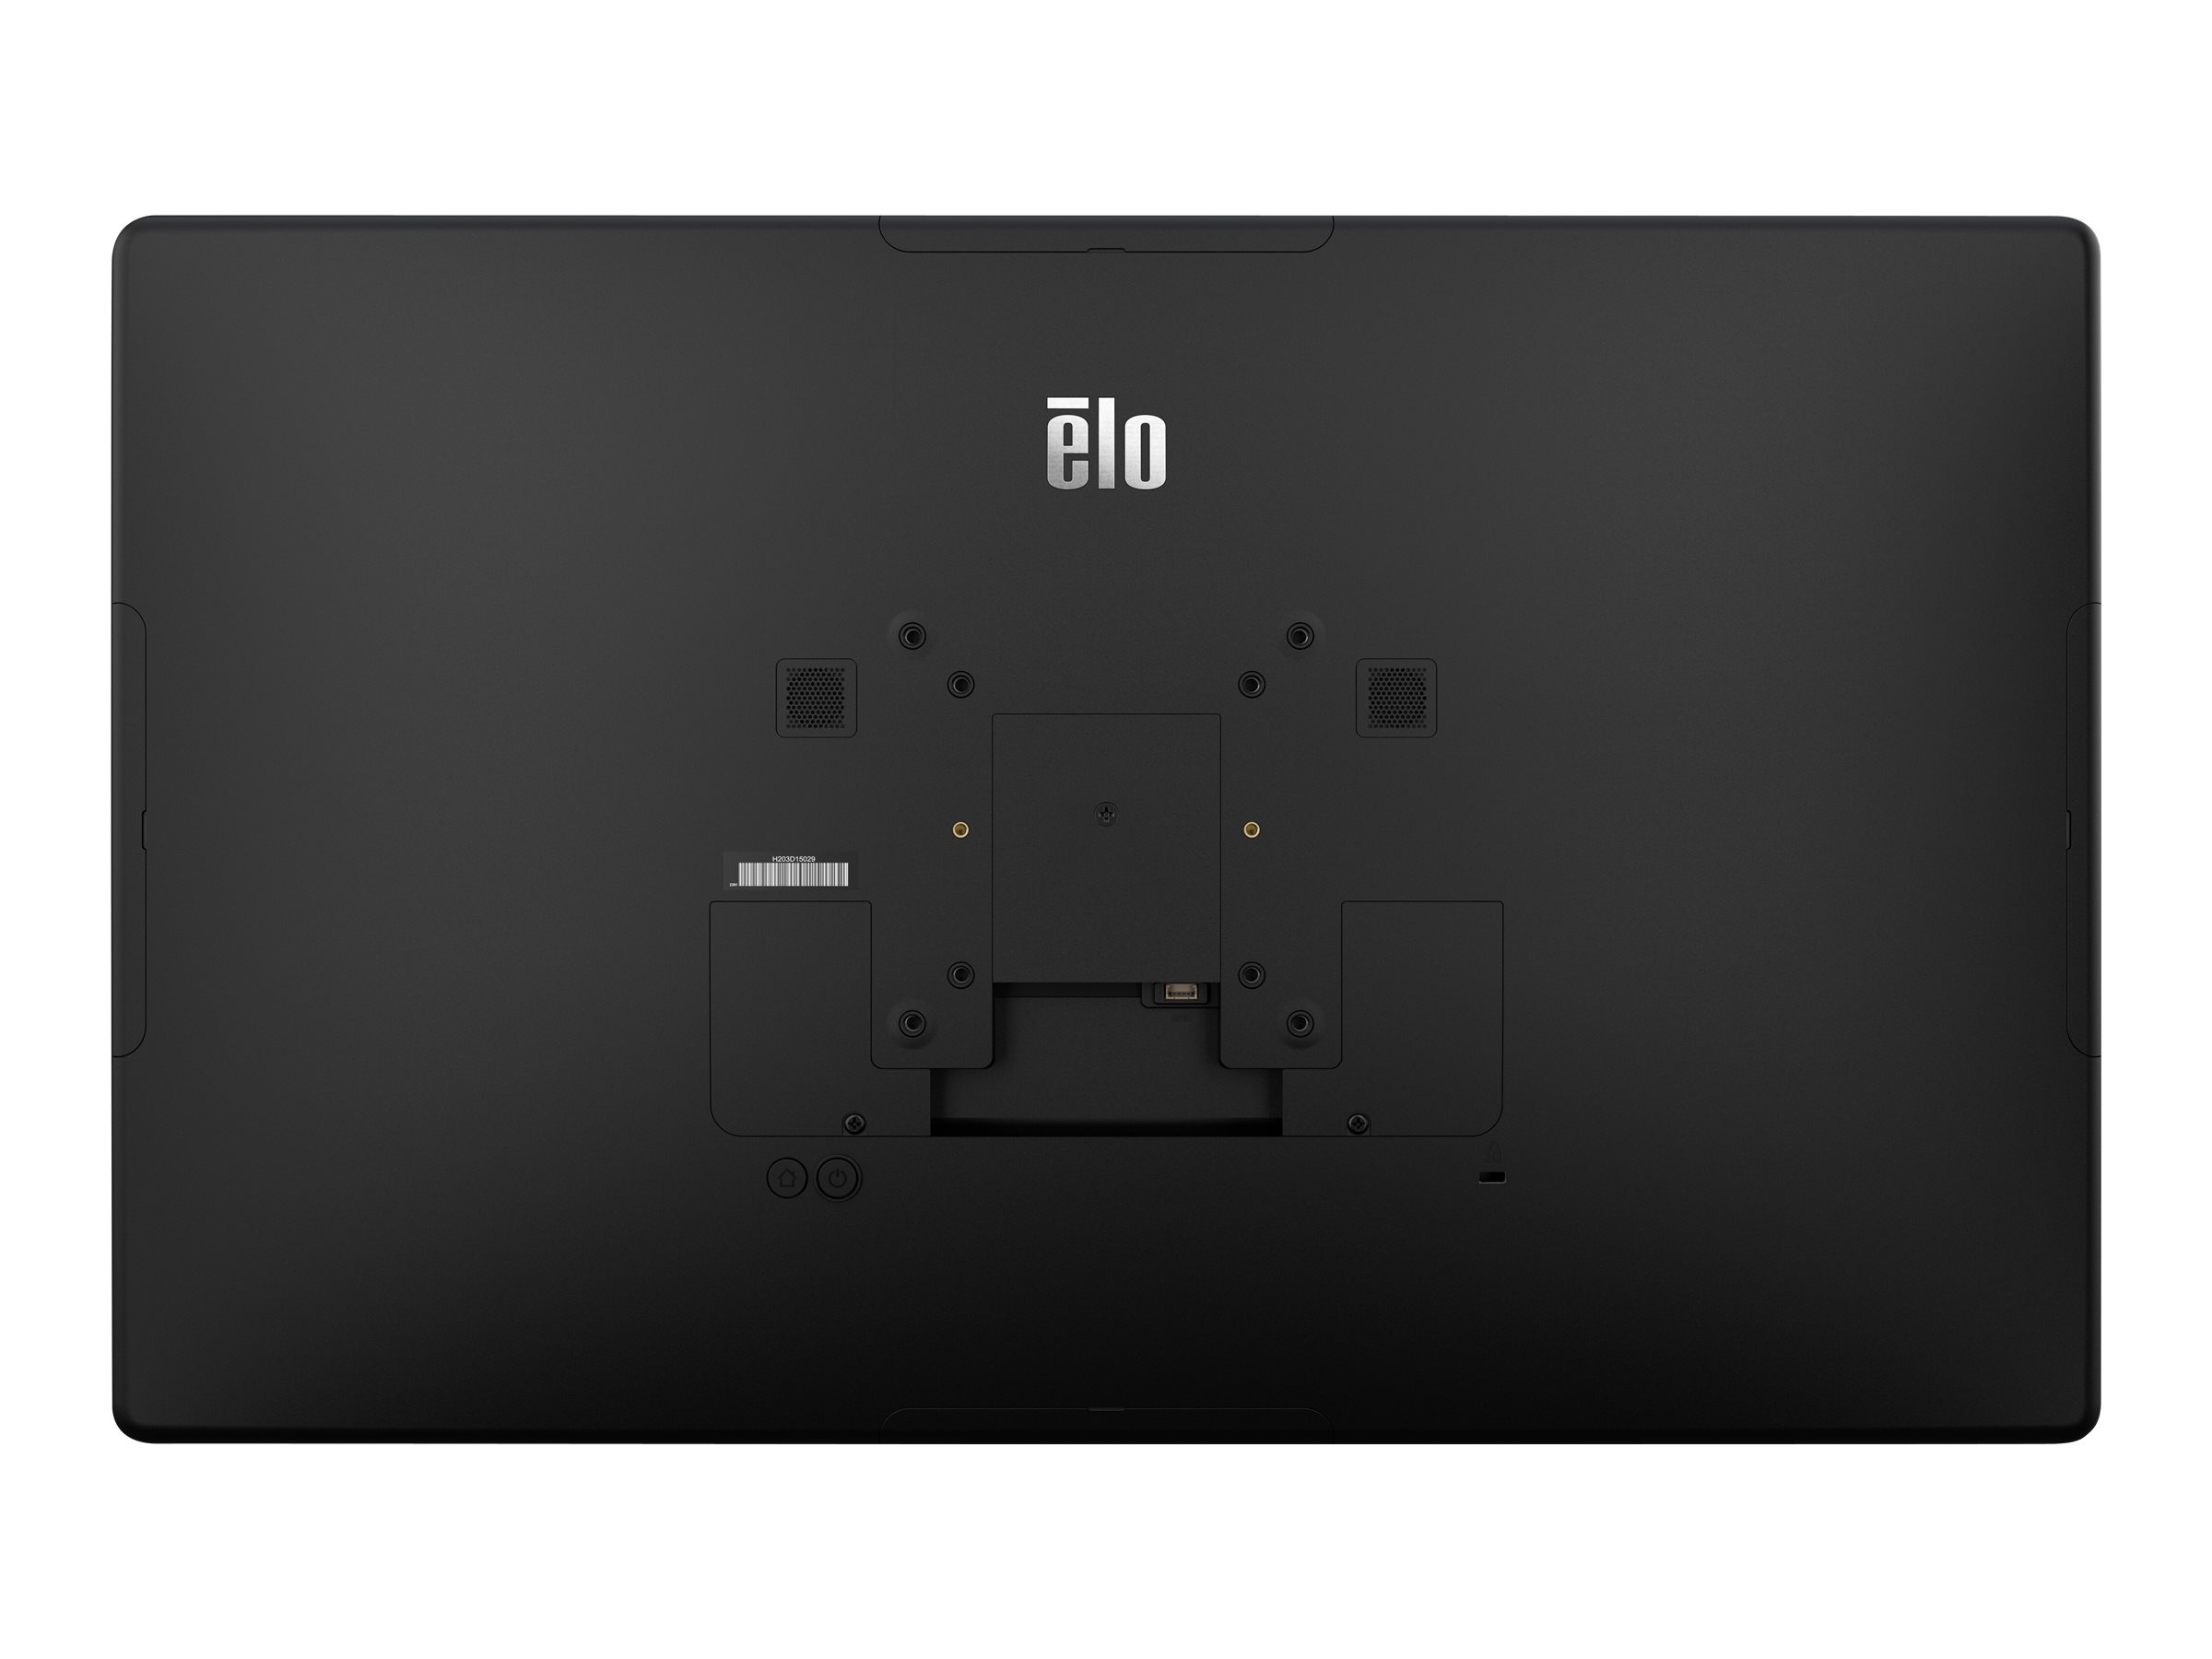 Elo Touch Solutions Elo I-Series 4.0 - Value - All-in-One (Komplettlösung) - 1 RK3399 - RAM 4 GB - Flash 32 GB - GigE - WLAN: 802.11a/b/g/n/ac, Bluetooth 5.0 - Android 10 - Monitor: LED 54.61 cm (21.5")